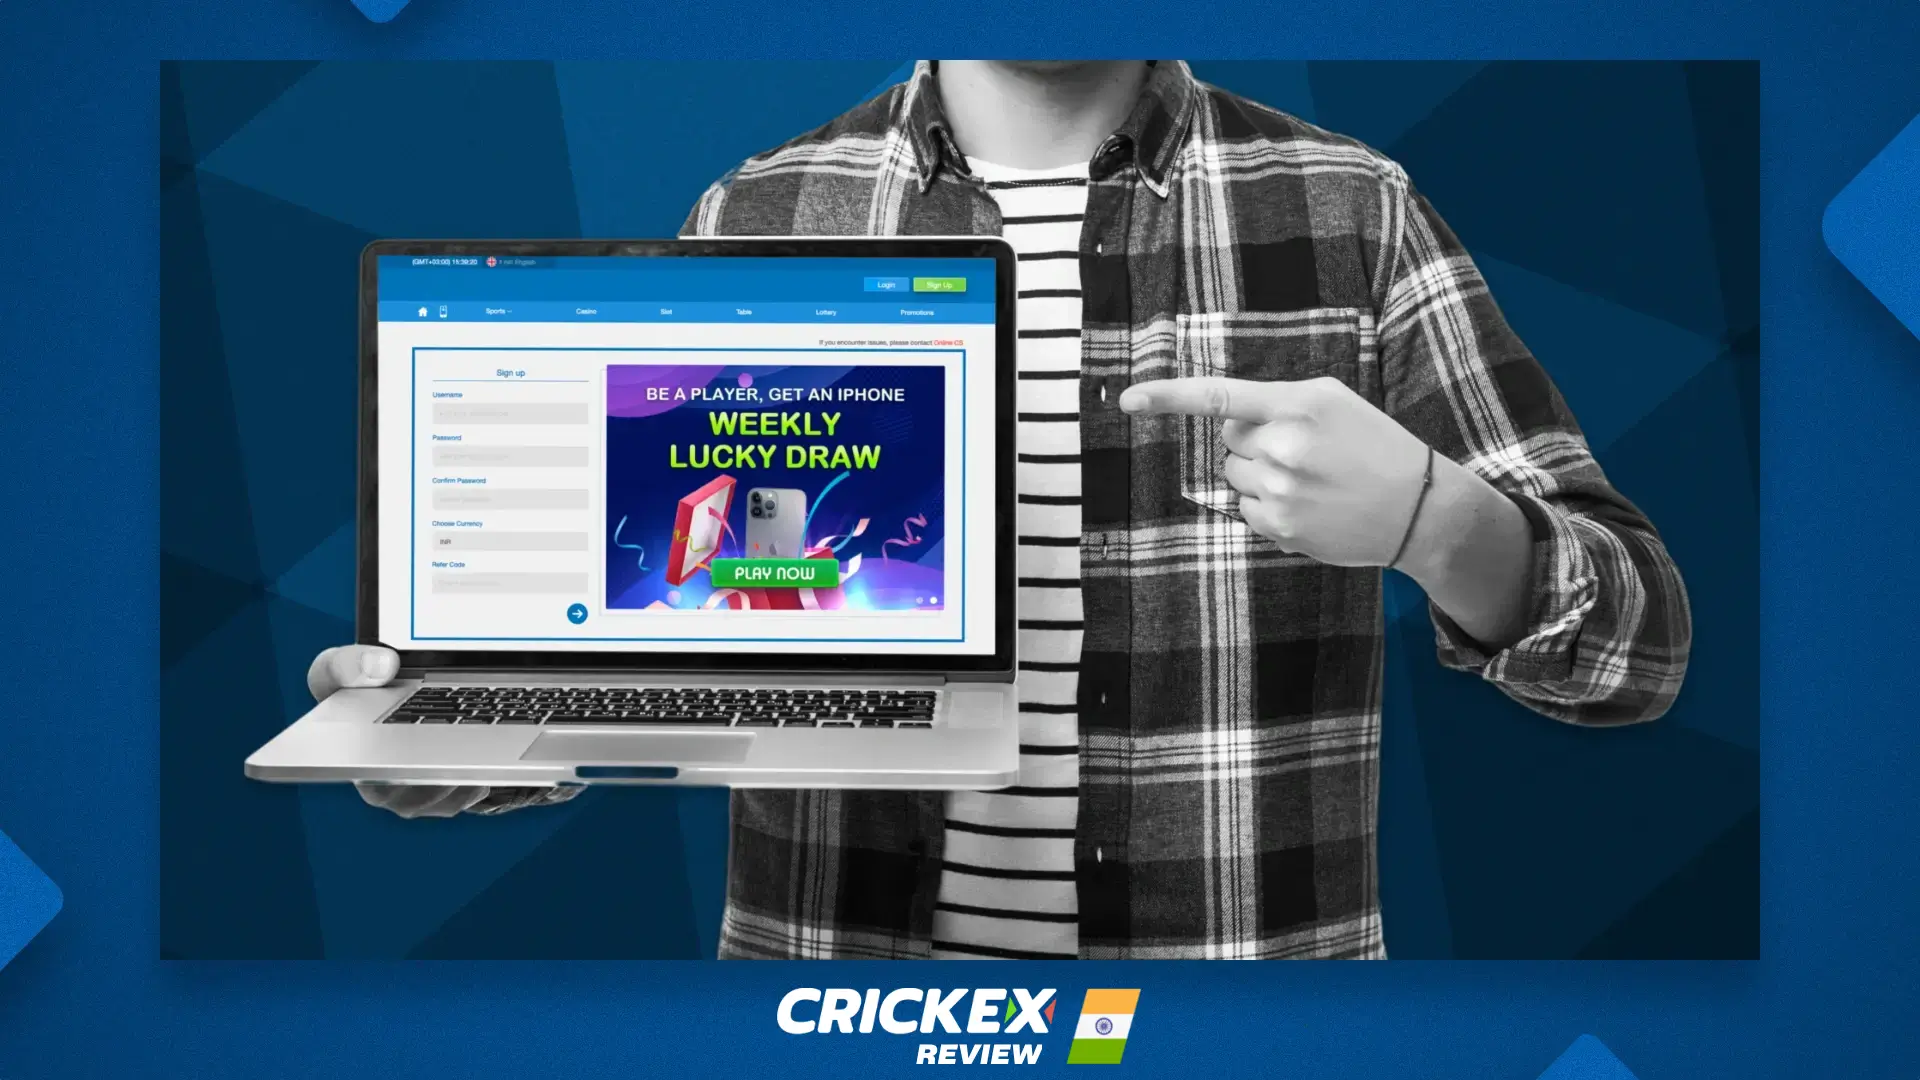 The main requirements for new players when registering at Crickex India